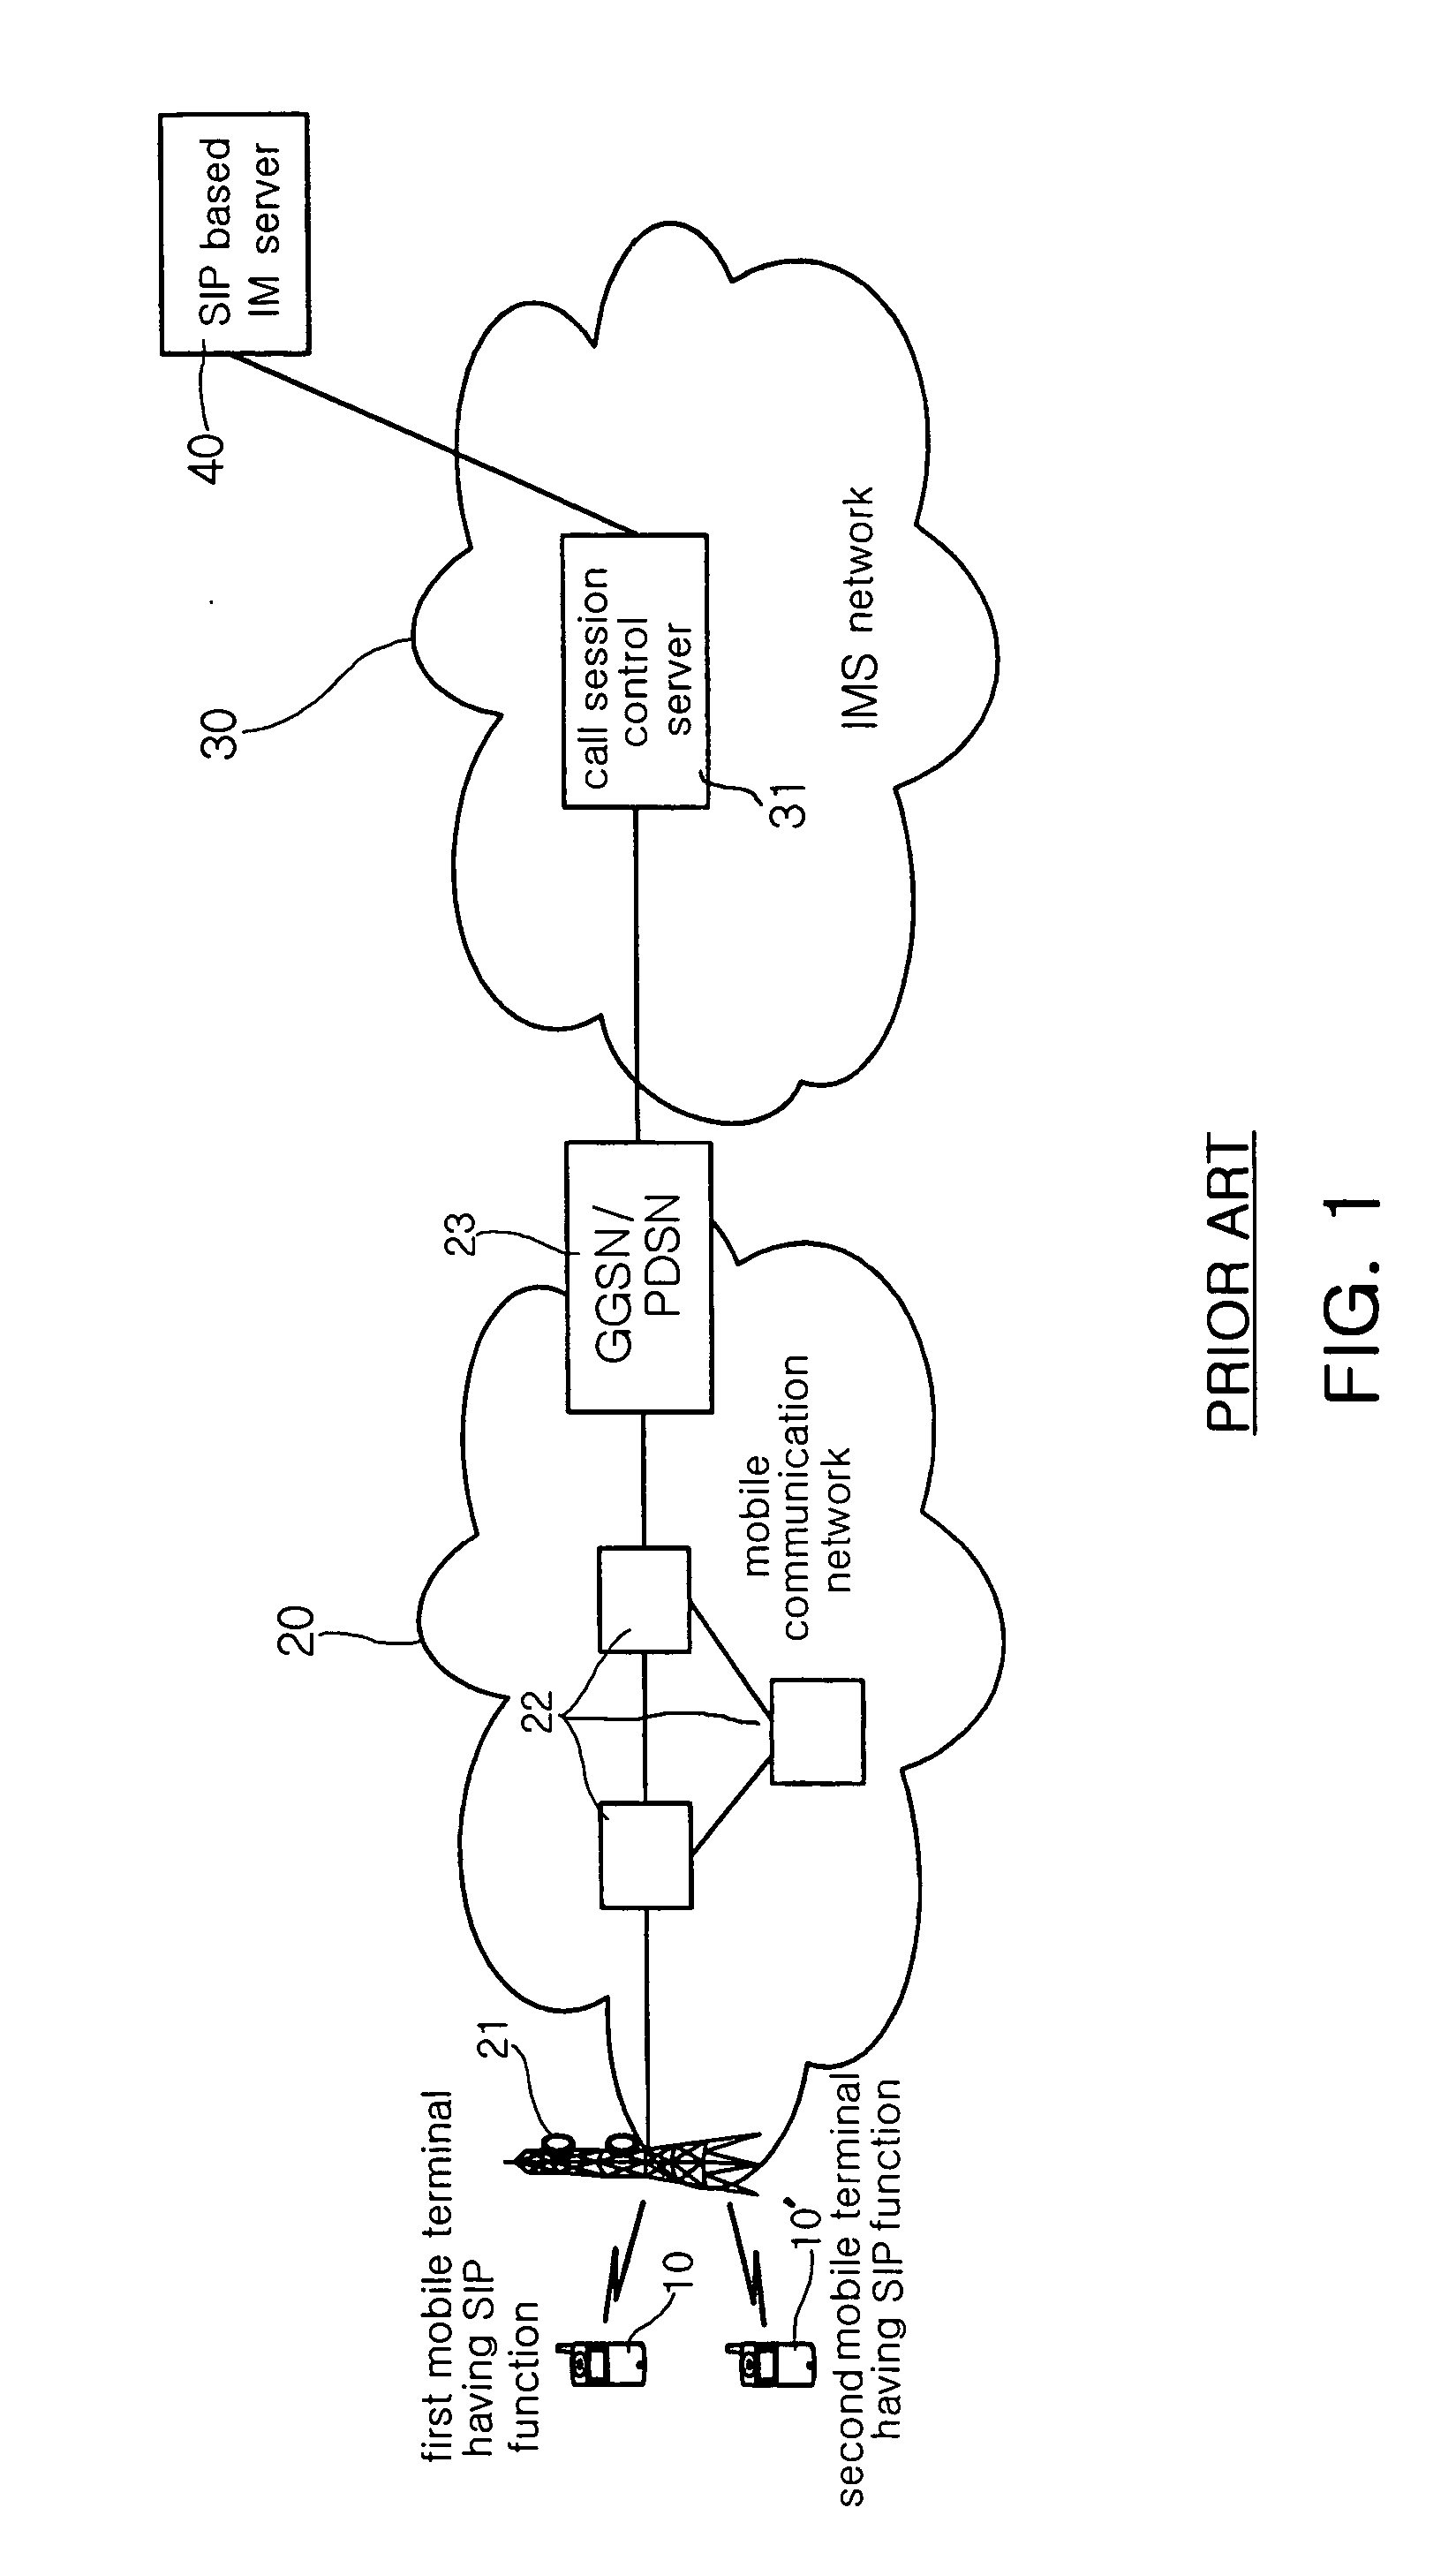 Method and system for providing SIP based instance messaging service to mobile terminal without SIP function through IP multimedia subsystem network, and instance messaging proxy server therefor